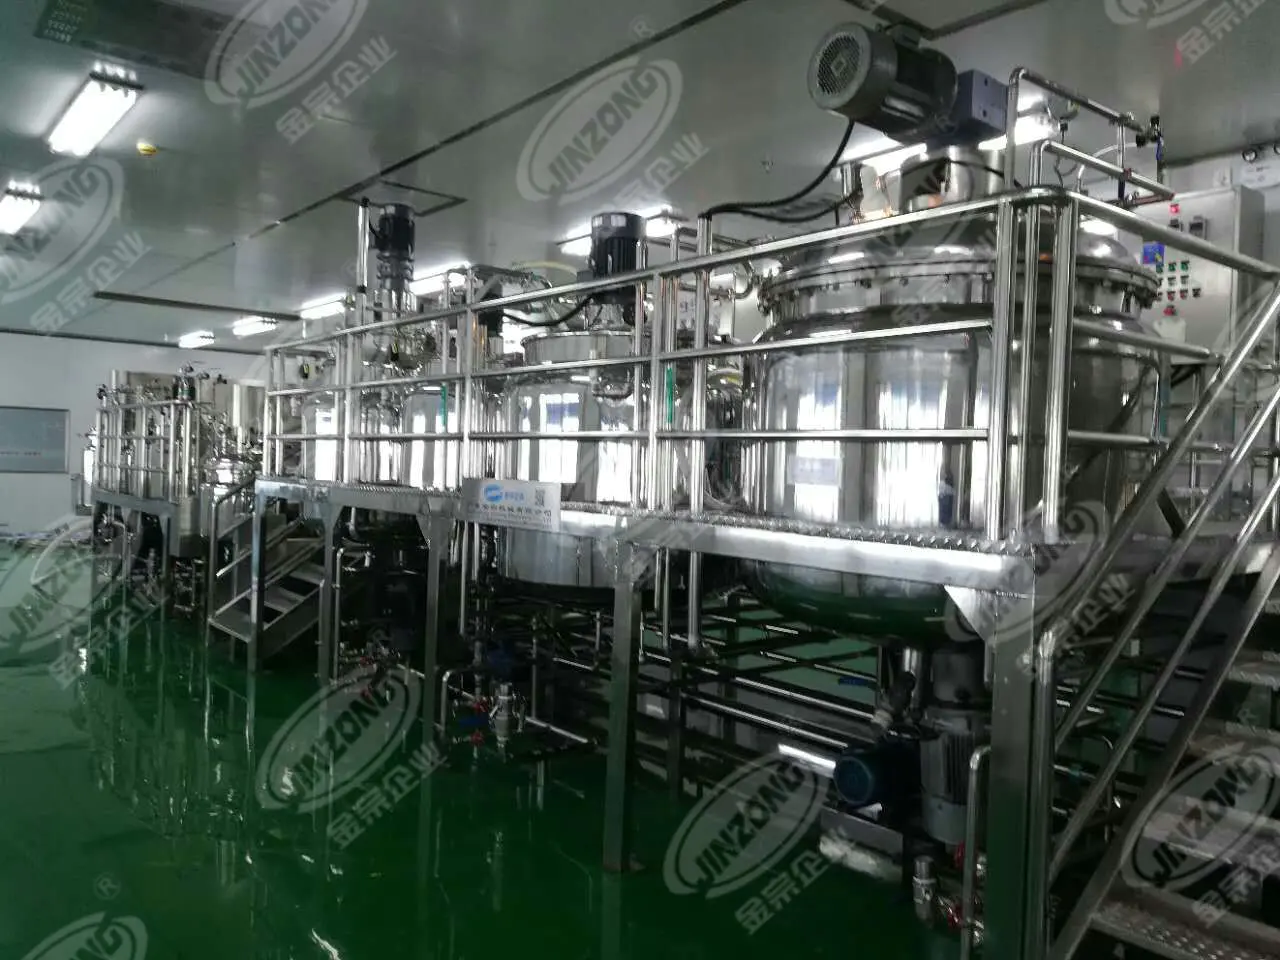 China Pharmaceutical Process Vessels - Jinzong Stainless Steel Jecketed Pharma Reactor